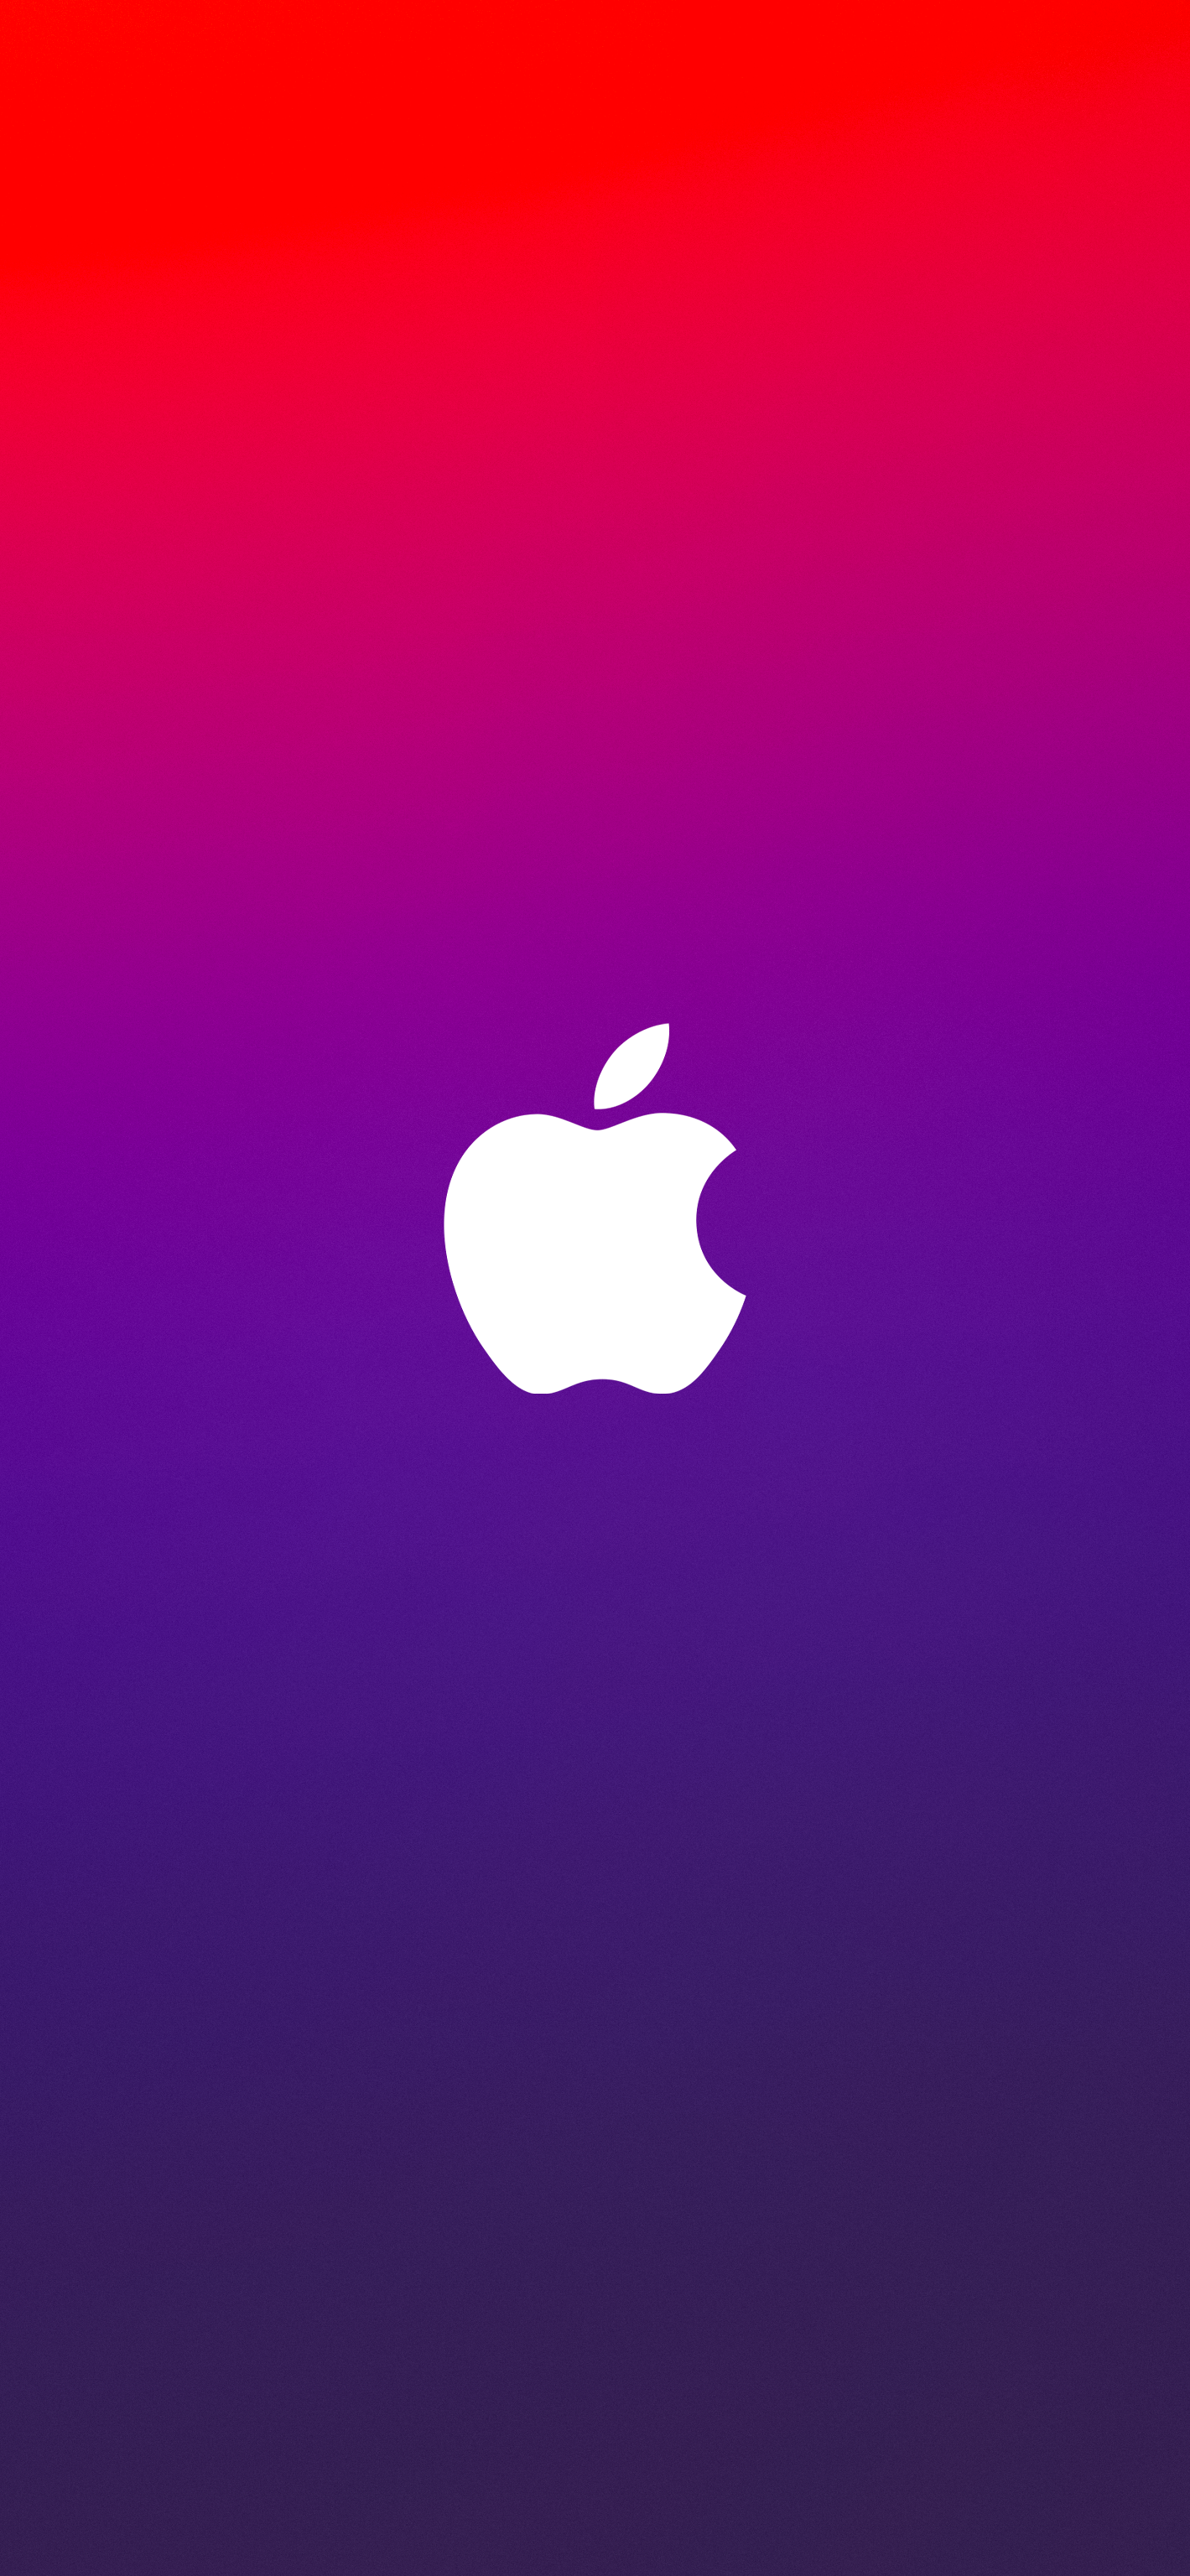 Colorful gradient Apple logo wallpaper for iPhone